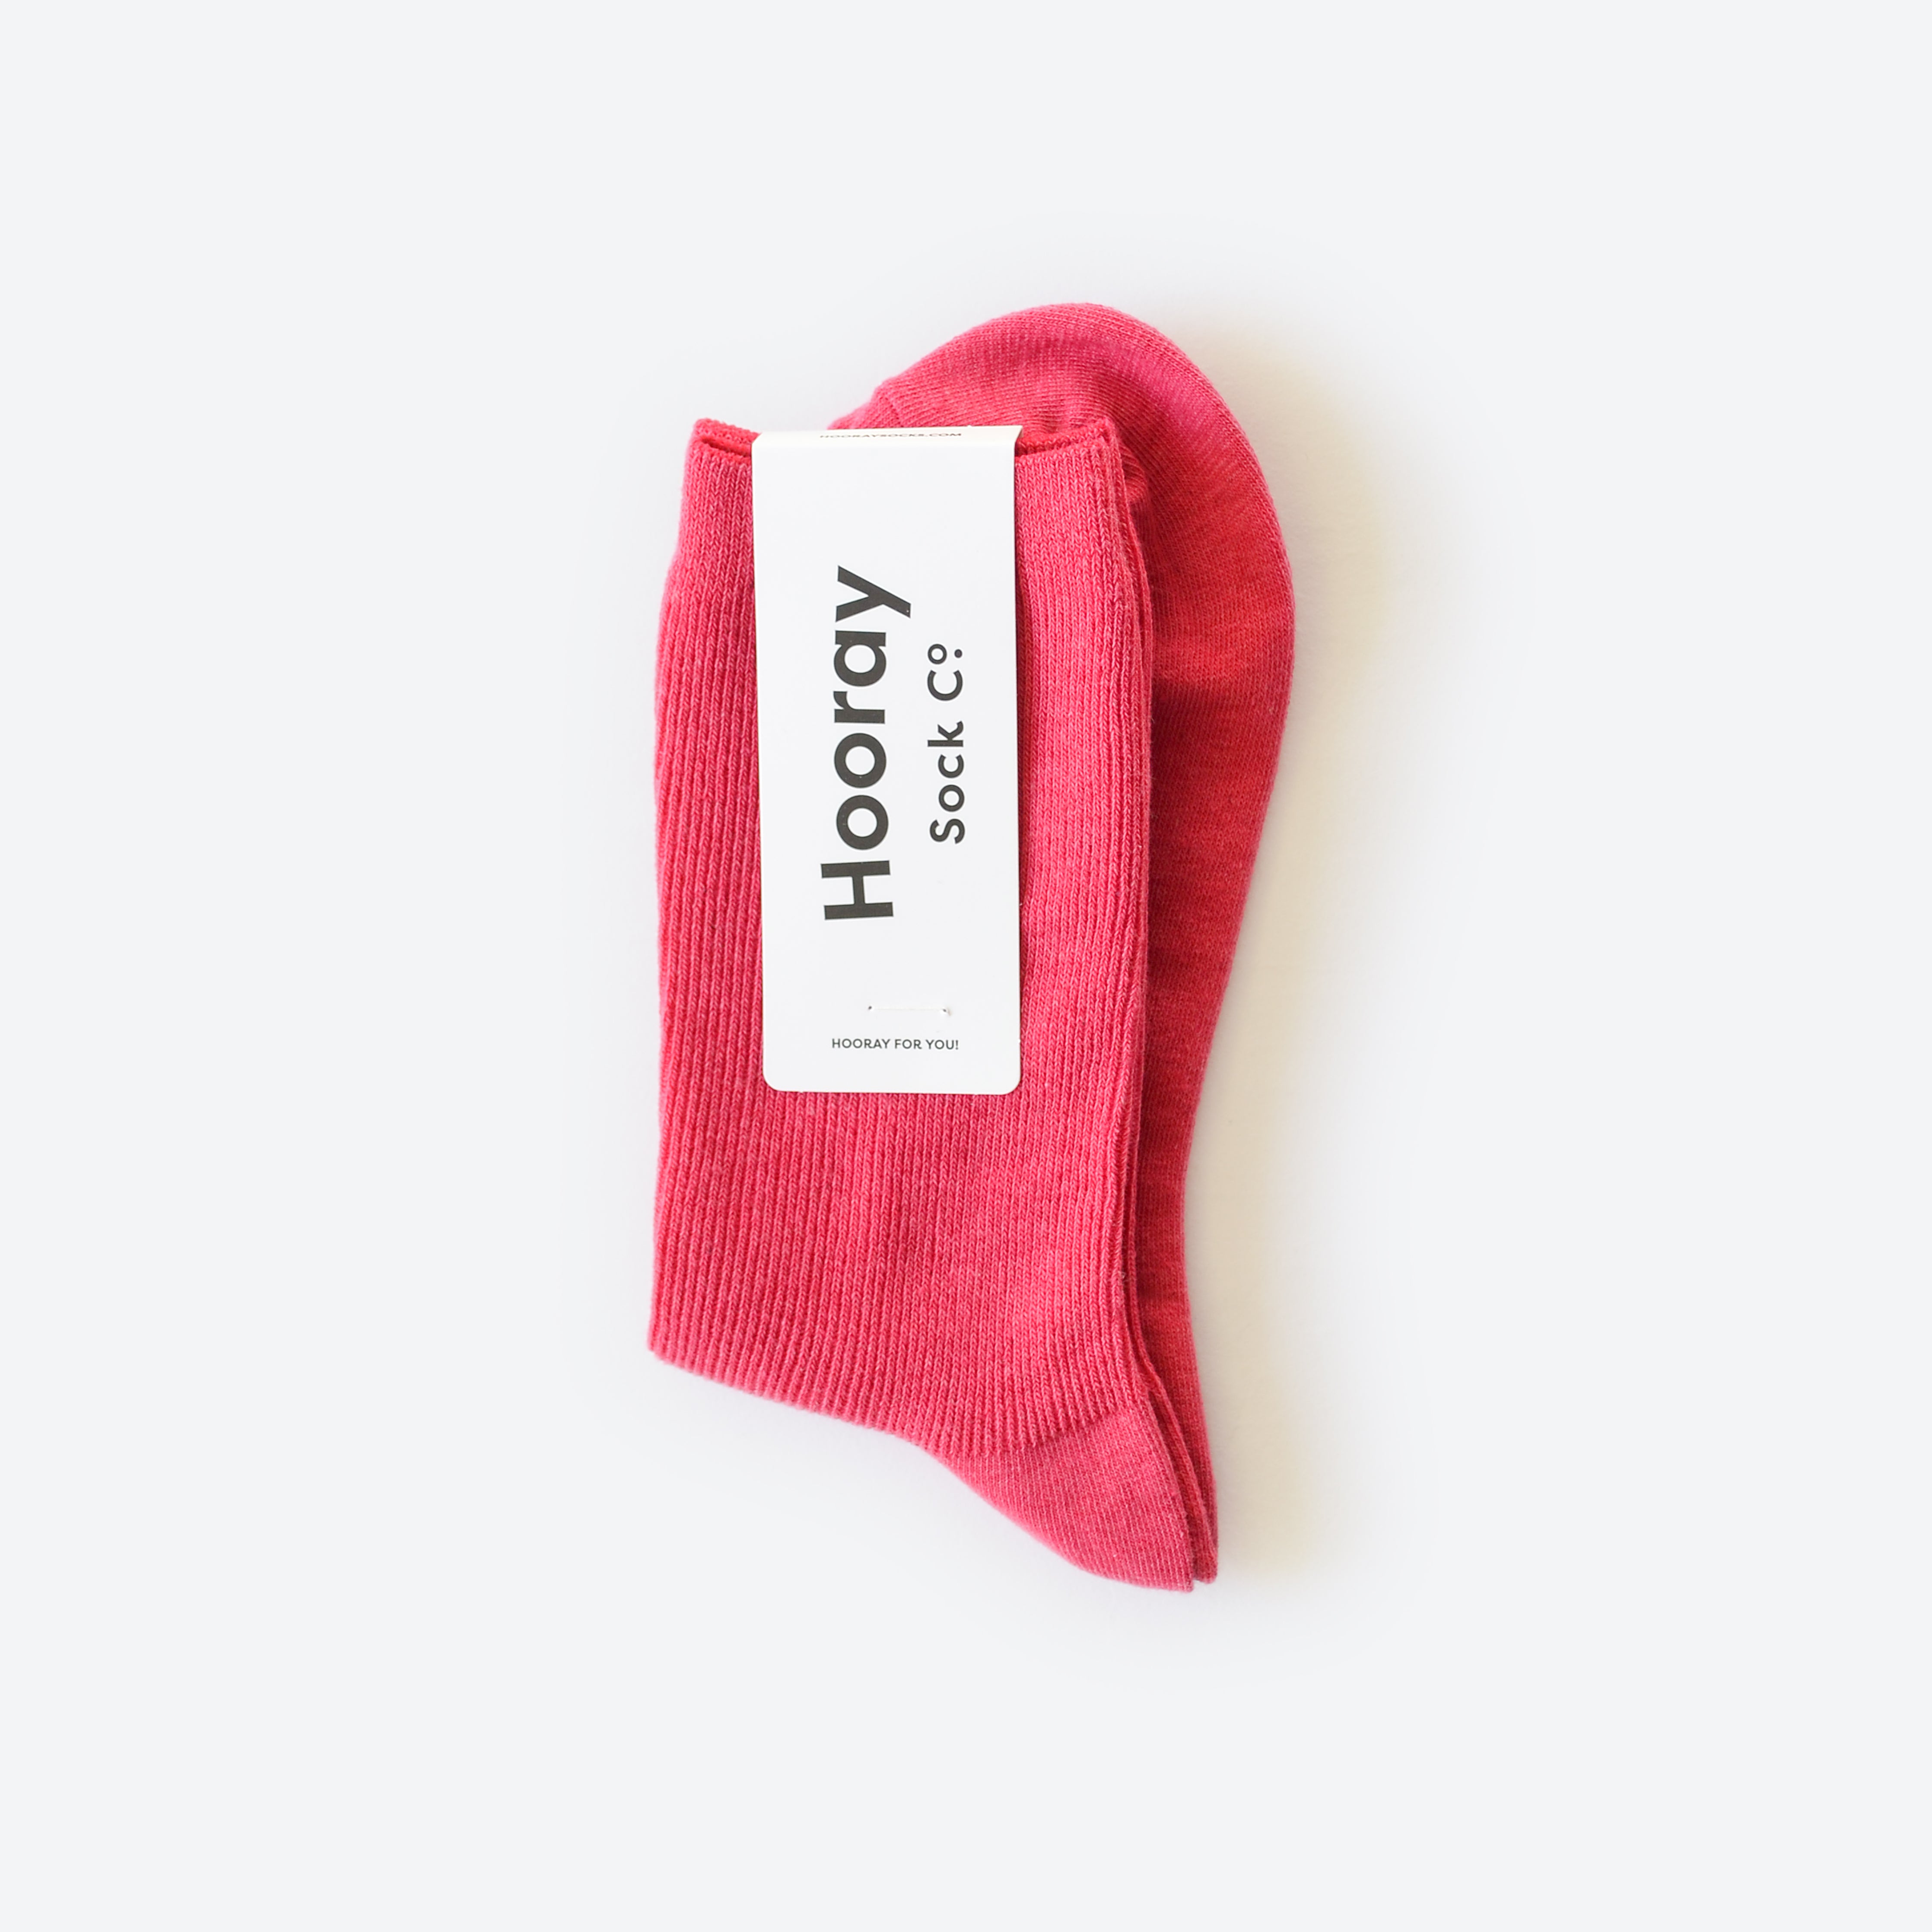 Hooray Sock Co.&#39;s Fuchsia Crew Socks: Everyday Cotton comfort with fetching Fuchsia flair. Crew length, 80% cotton, 20% spandex. Made in South Korea. Unisex. Small (Women&#39;s 4-10). 